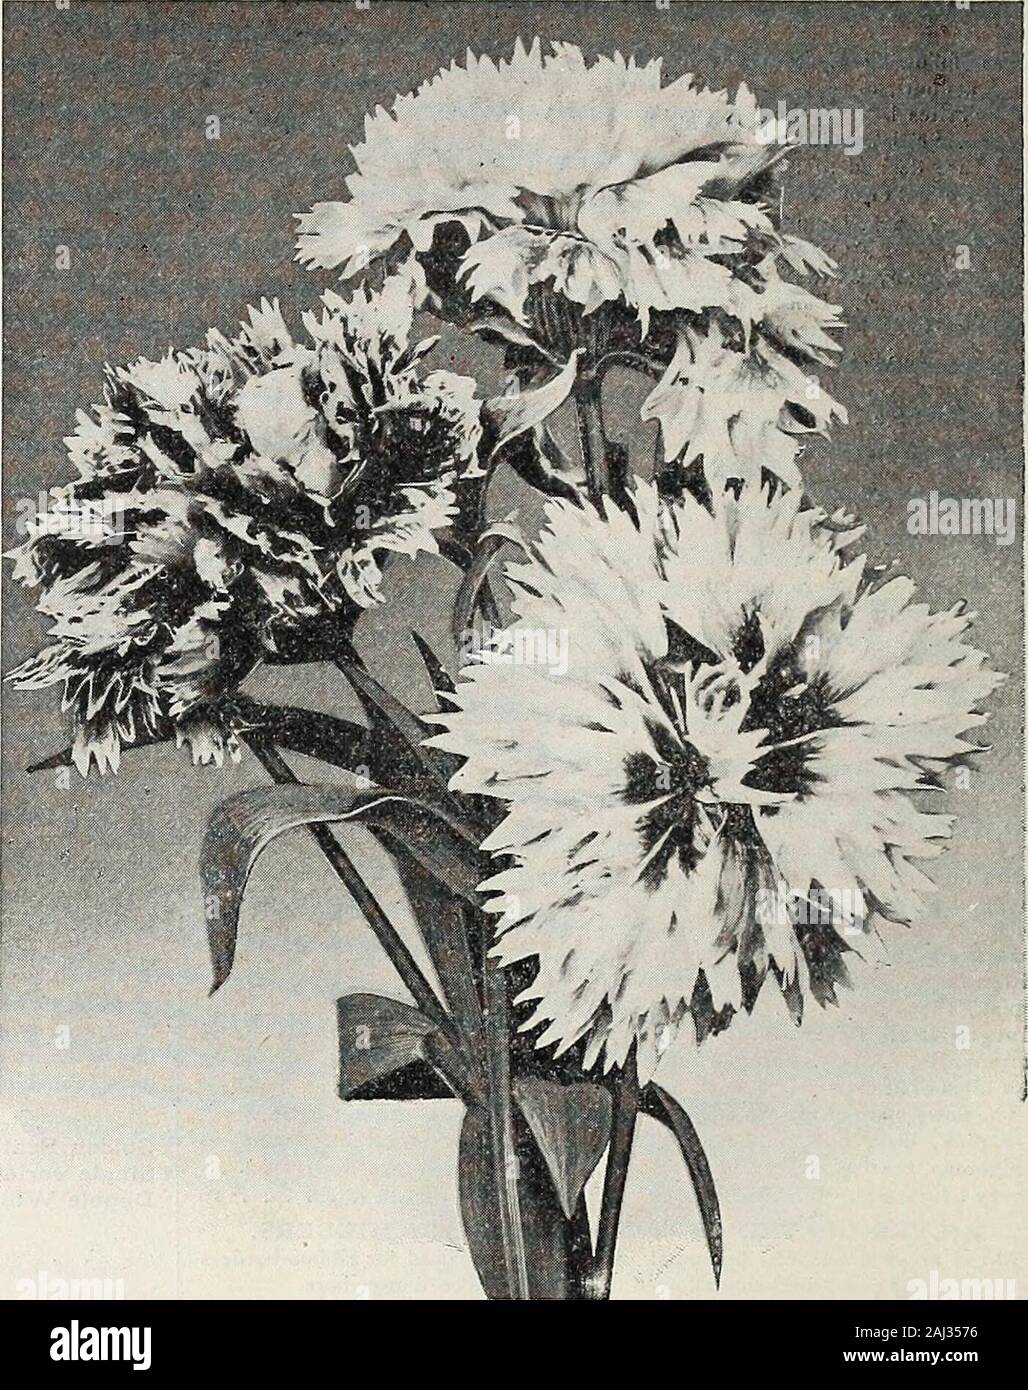 Vick's garden and floral guide . ith the earliness of the Marguerite 25 Grenadin. Double scarlet. Dwarf and compact. Very early ? ? . . 15 Extra Choice German Seed. Mixed varieties 20 Choicest, Picotee, with white ground 50 Choicest, Picotee, with yellow ground 50 Extra Italian Seed, saved from prize flowers only . . 50 PERPETUAL-FLOWERING CARNATIONS.Marguerite, Early-Flowering. This class excels in allrespects. It is the most profuse bloomer of any of the Pinks. Ex-quisite in color, showing beautiful shades in white, red, pink, variegated,etc. Large size, perfect form, dwarf habit, compact an Stock Photo